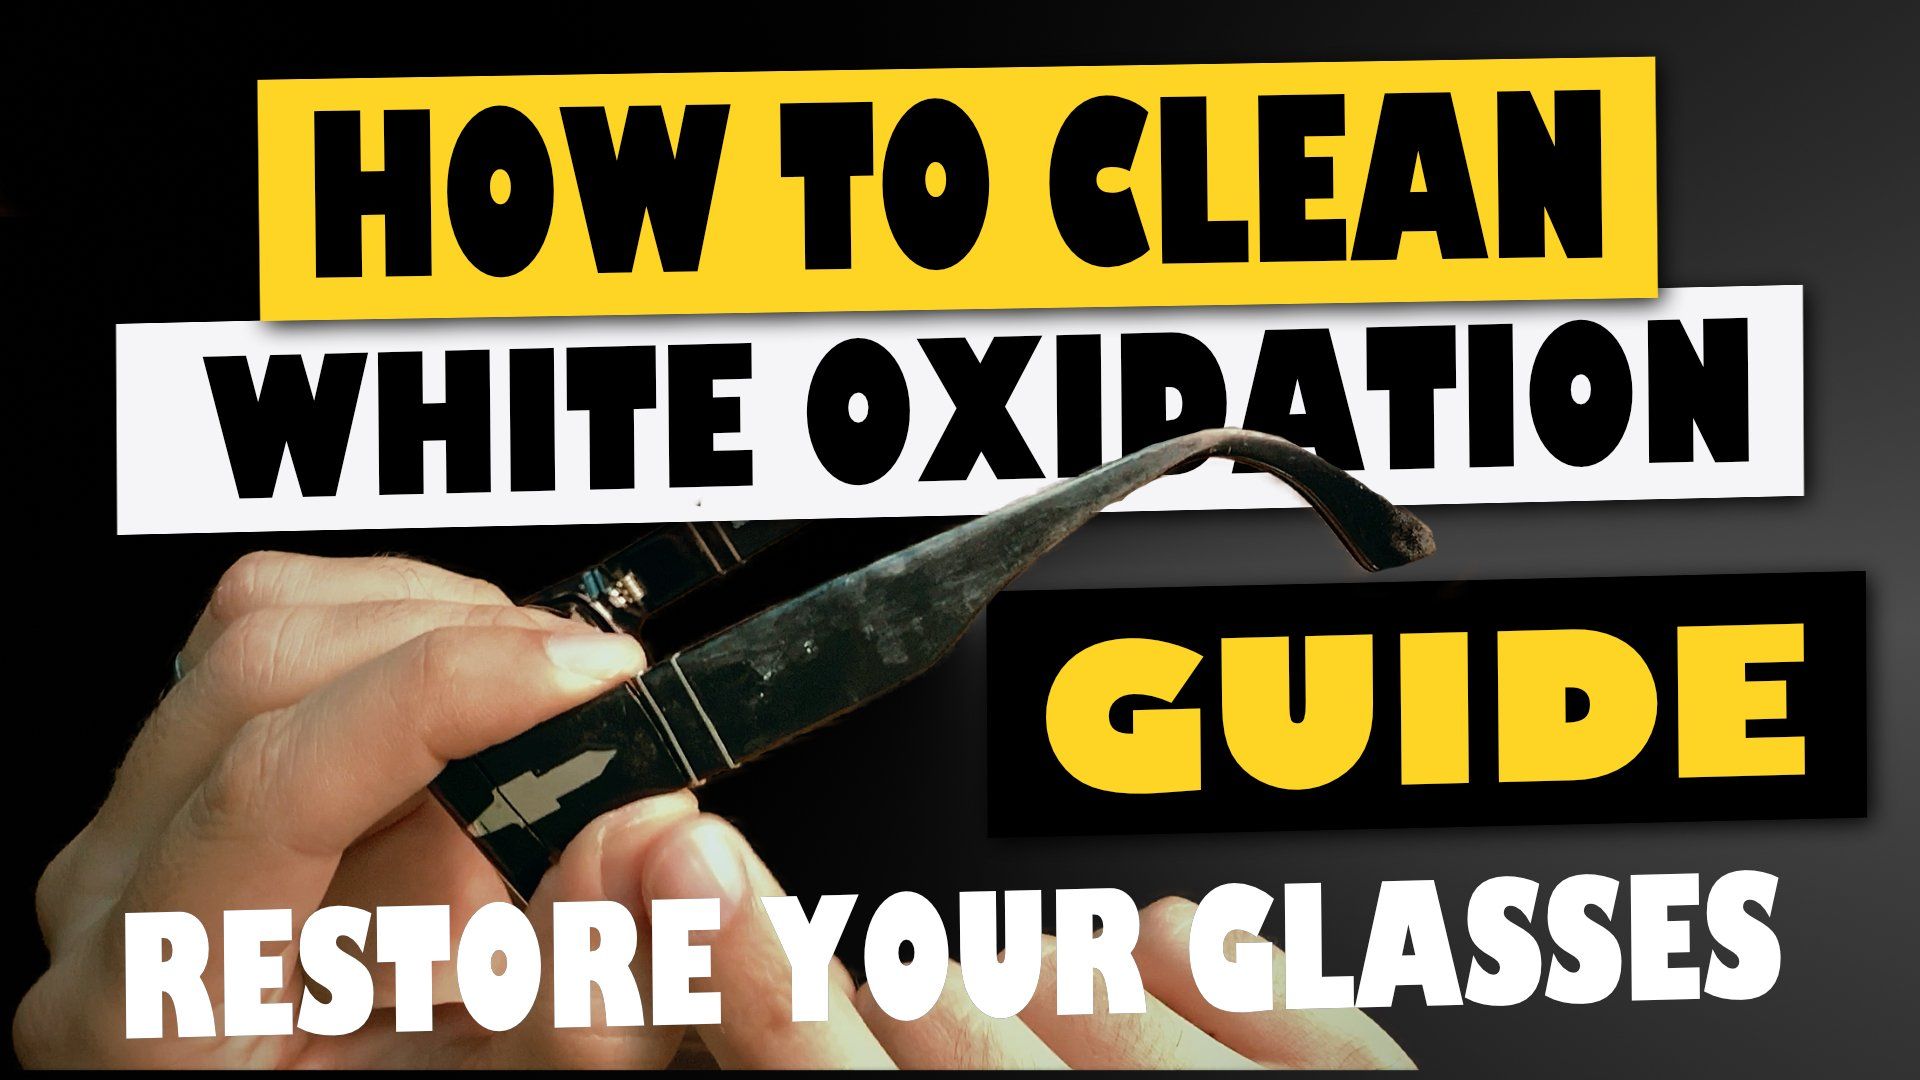 Image of how to clean white oxidation | restore our glasses